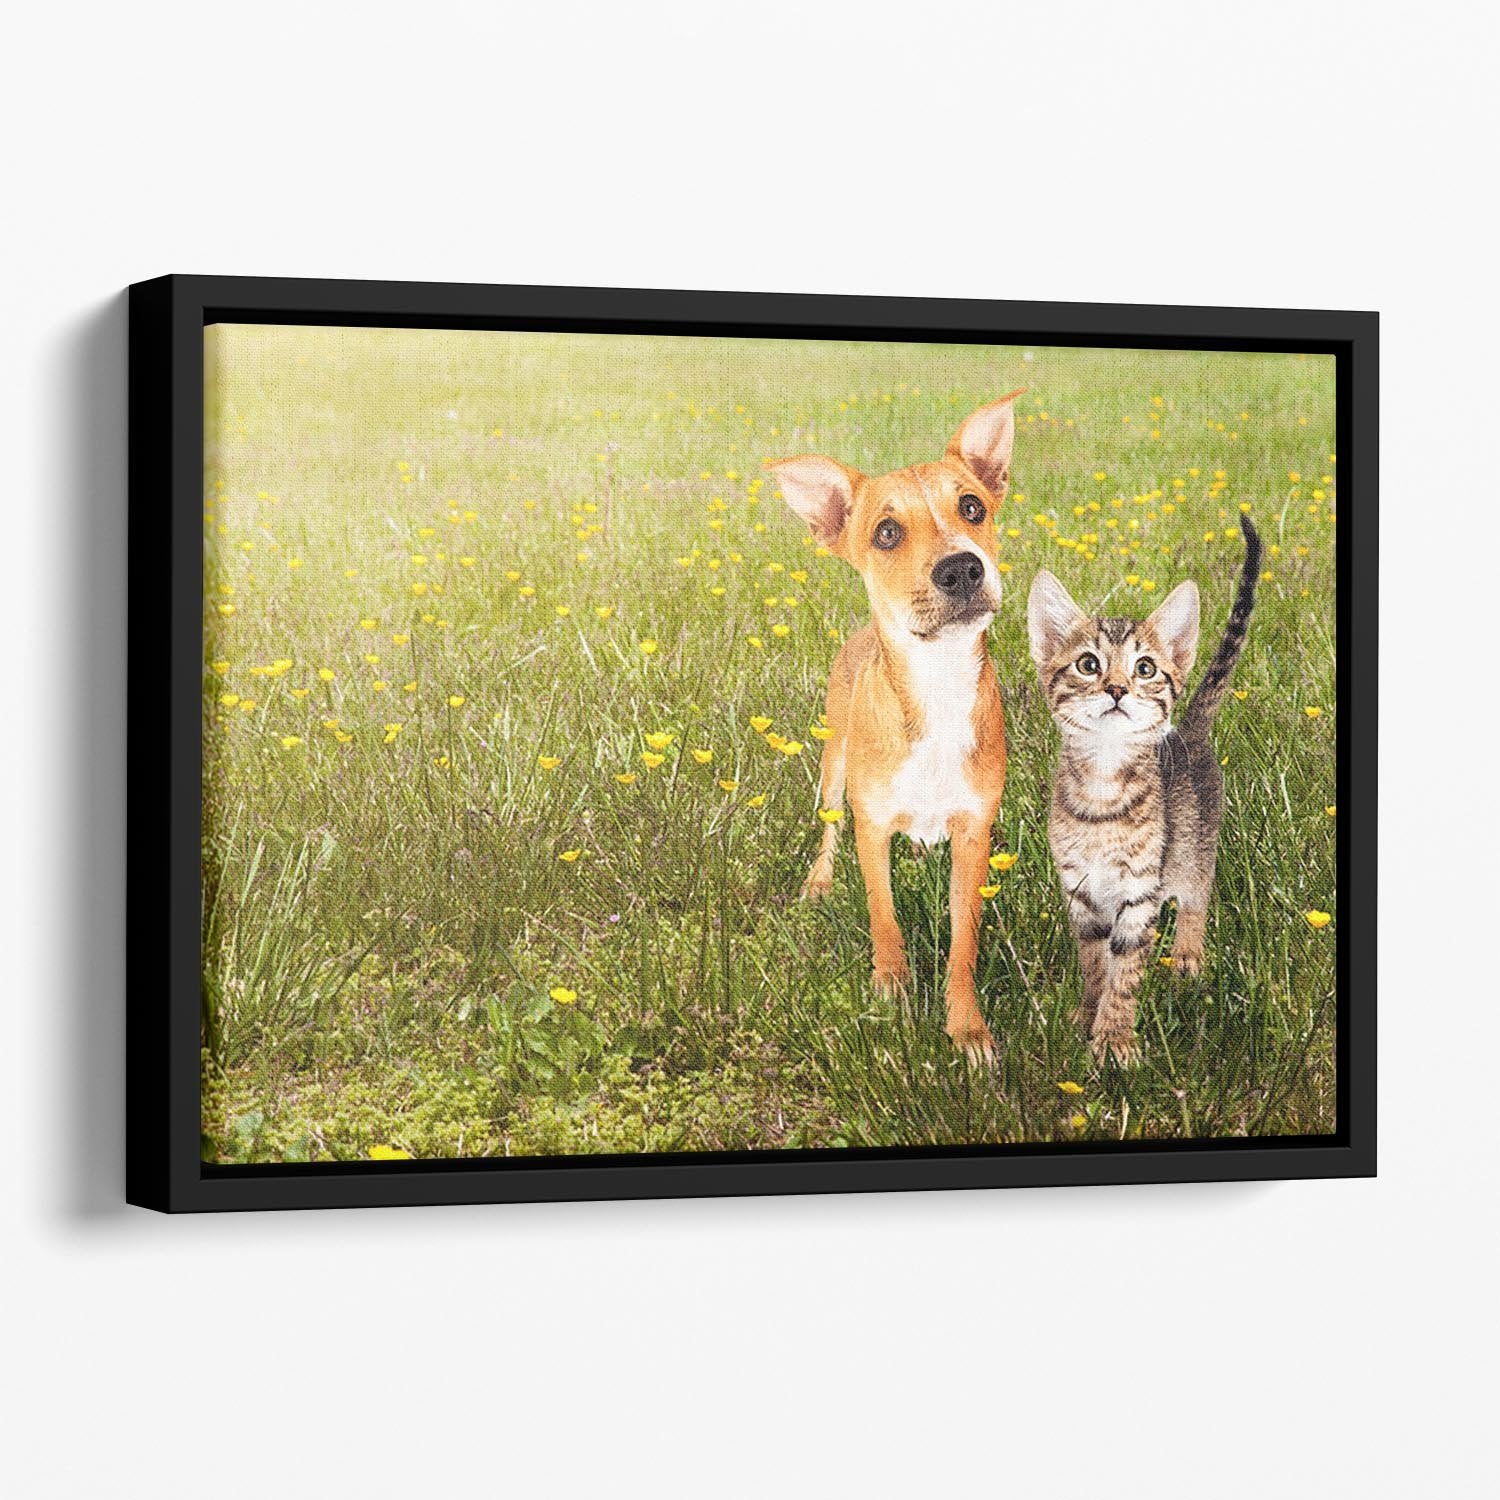 Cute kitten and puppy together in a field Floating Framed Canvas - Canvas Art Rocks - 1